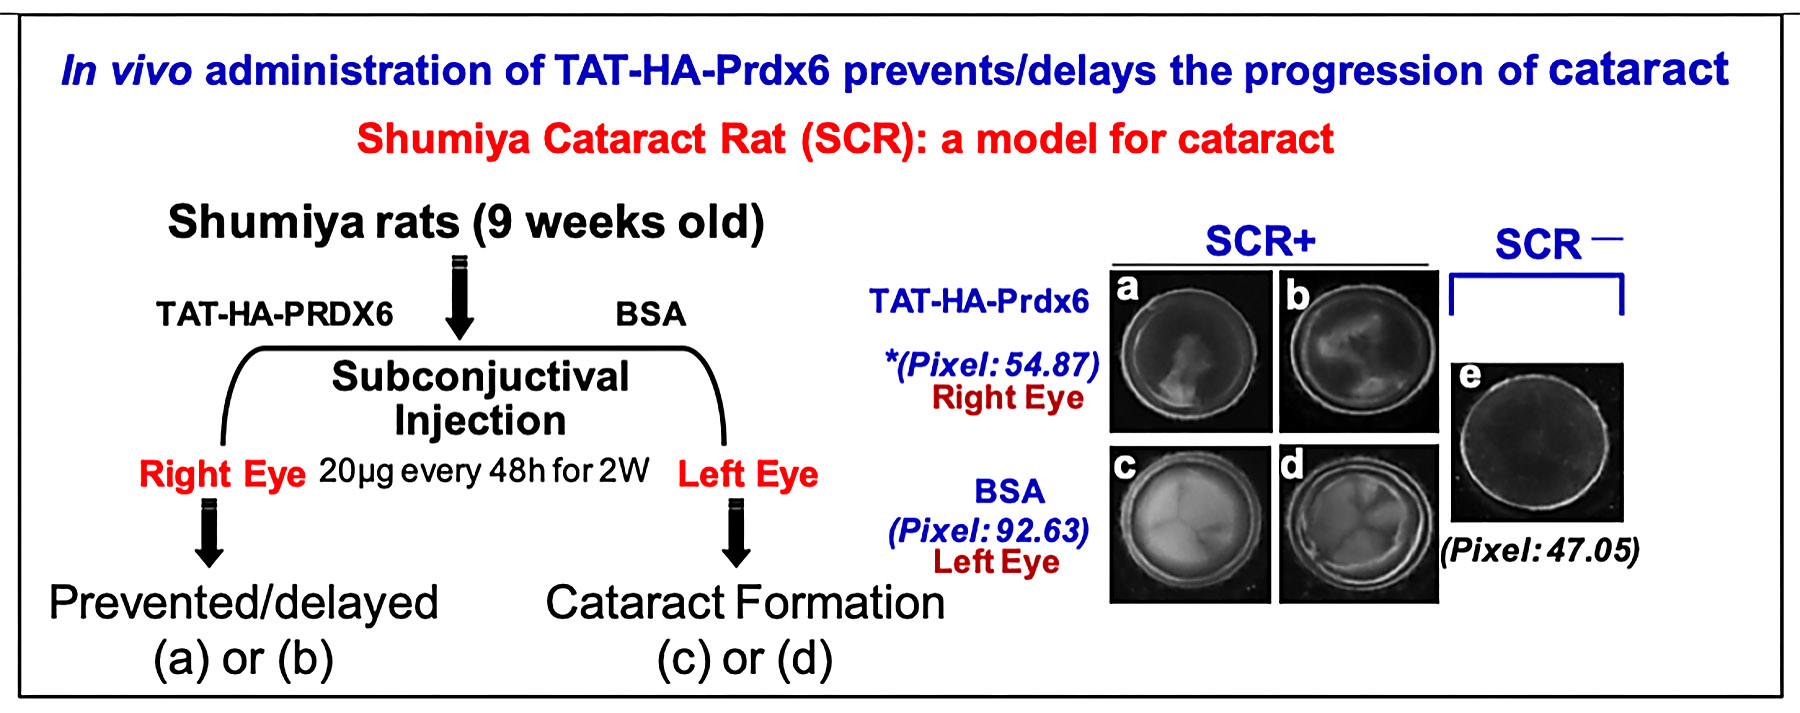 Graphic showing how recombinant Prdx6 linked to TAT, when injected subconjunctivally, can reach the lens, internalize into LECs, and delay cataractogenesis. 